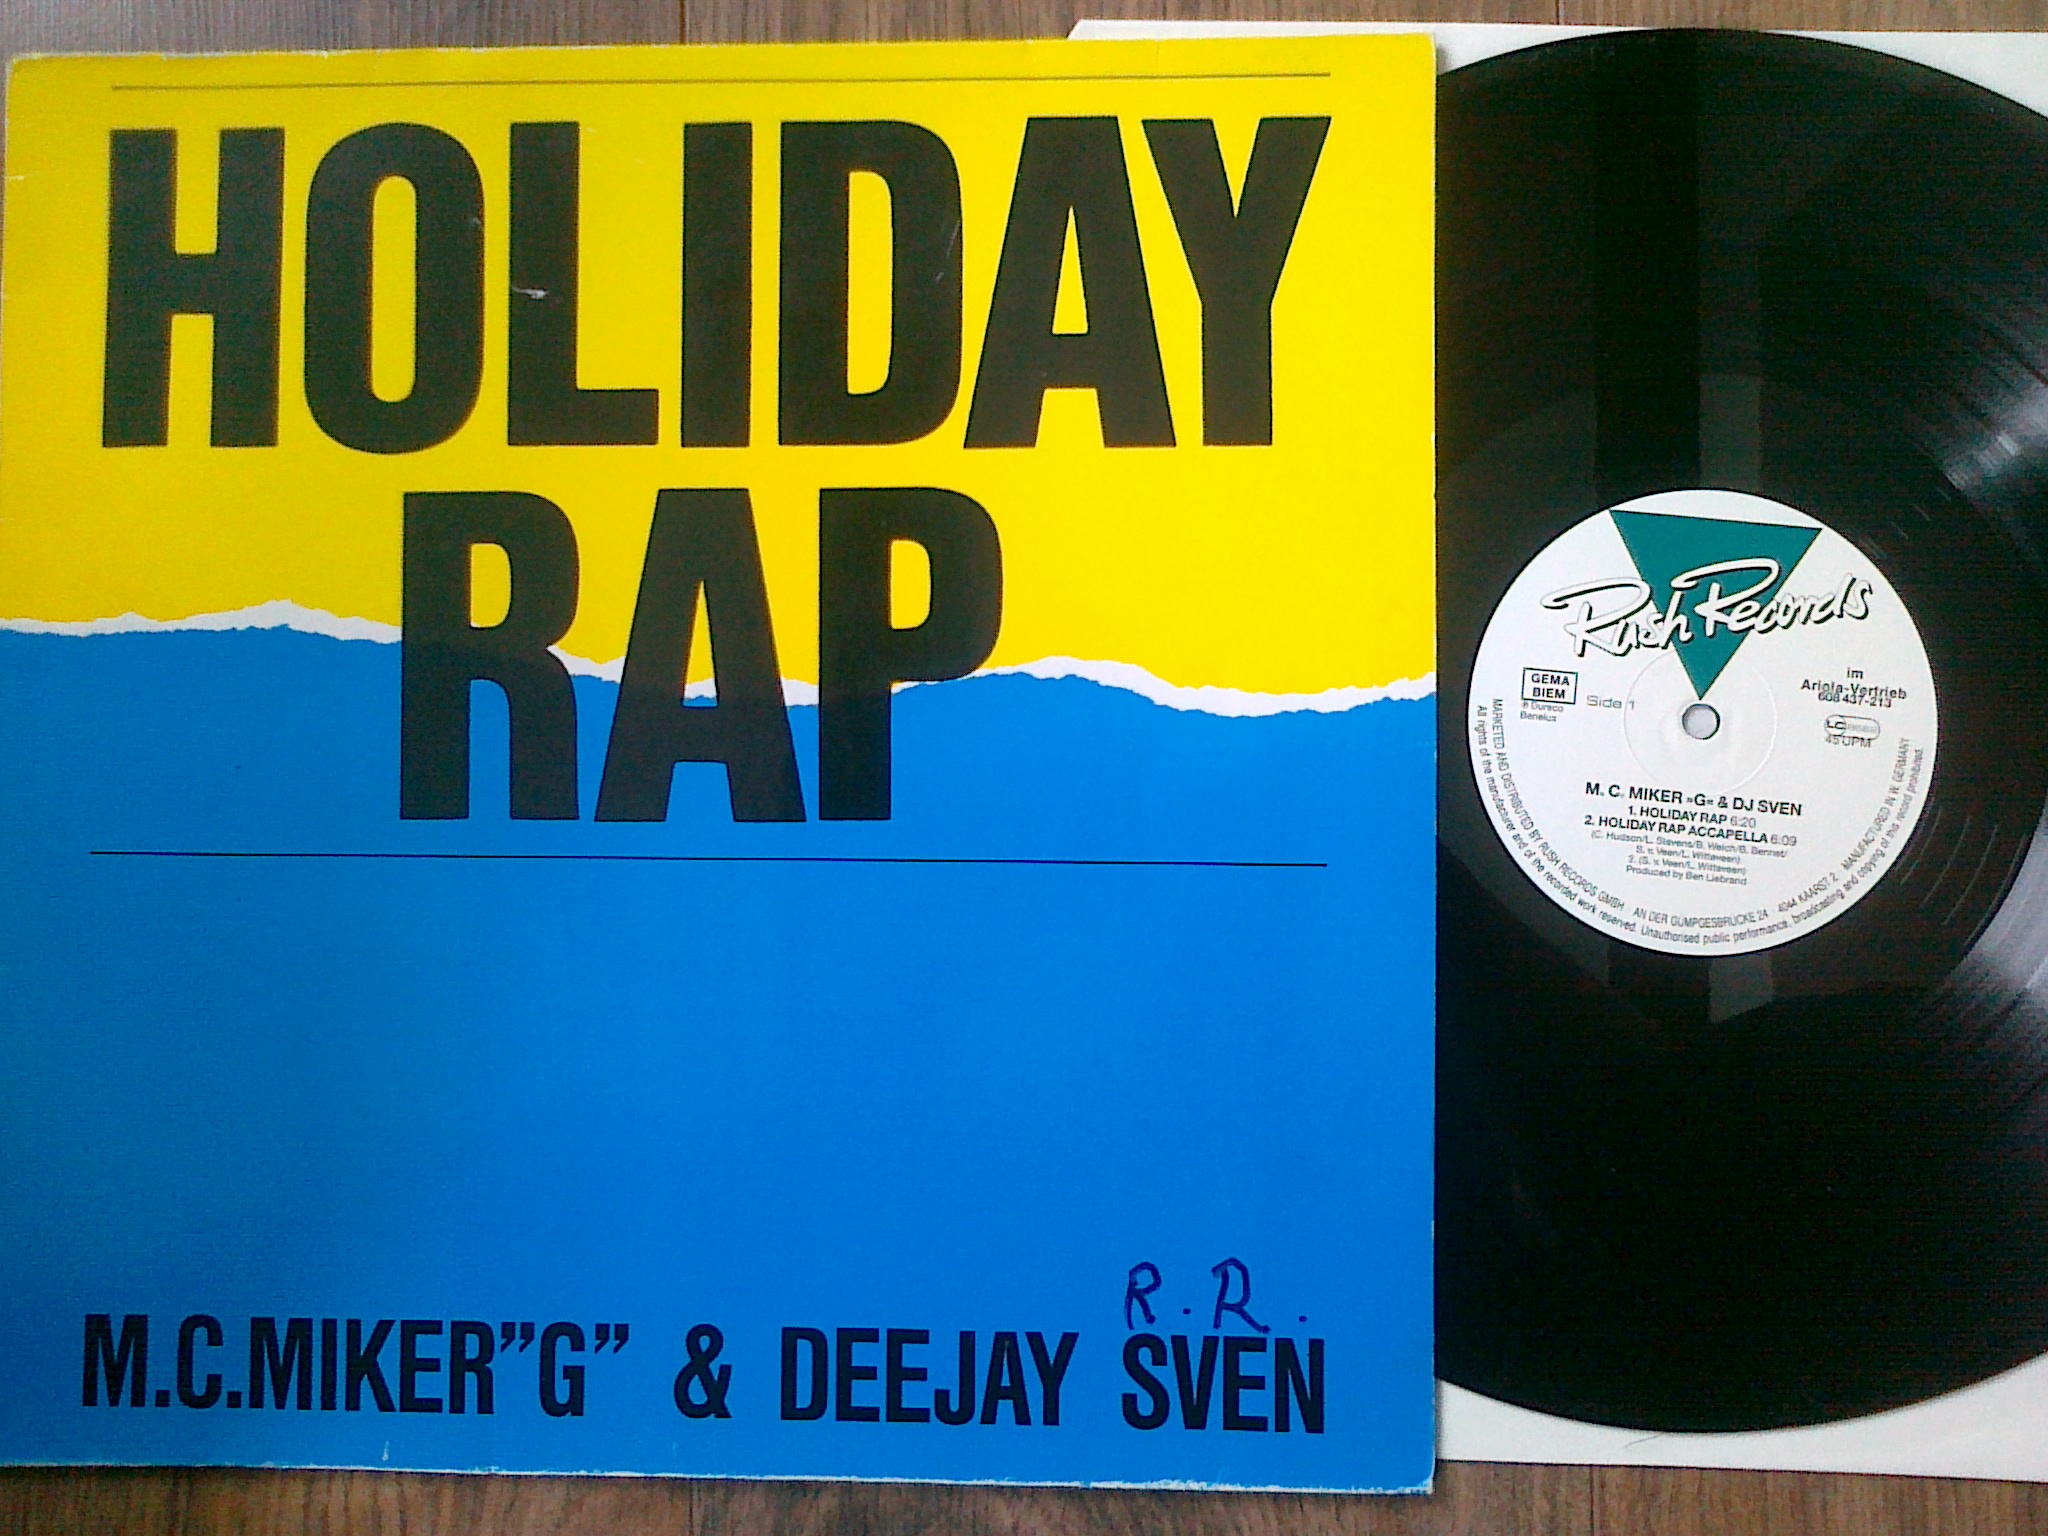 M.C.Miker G And Deejay Sven - Holiday Rap